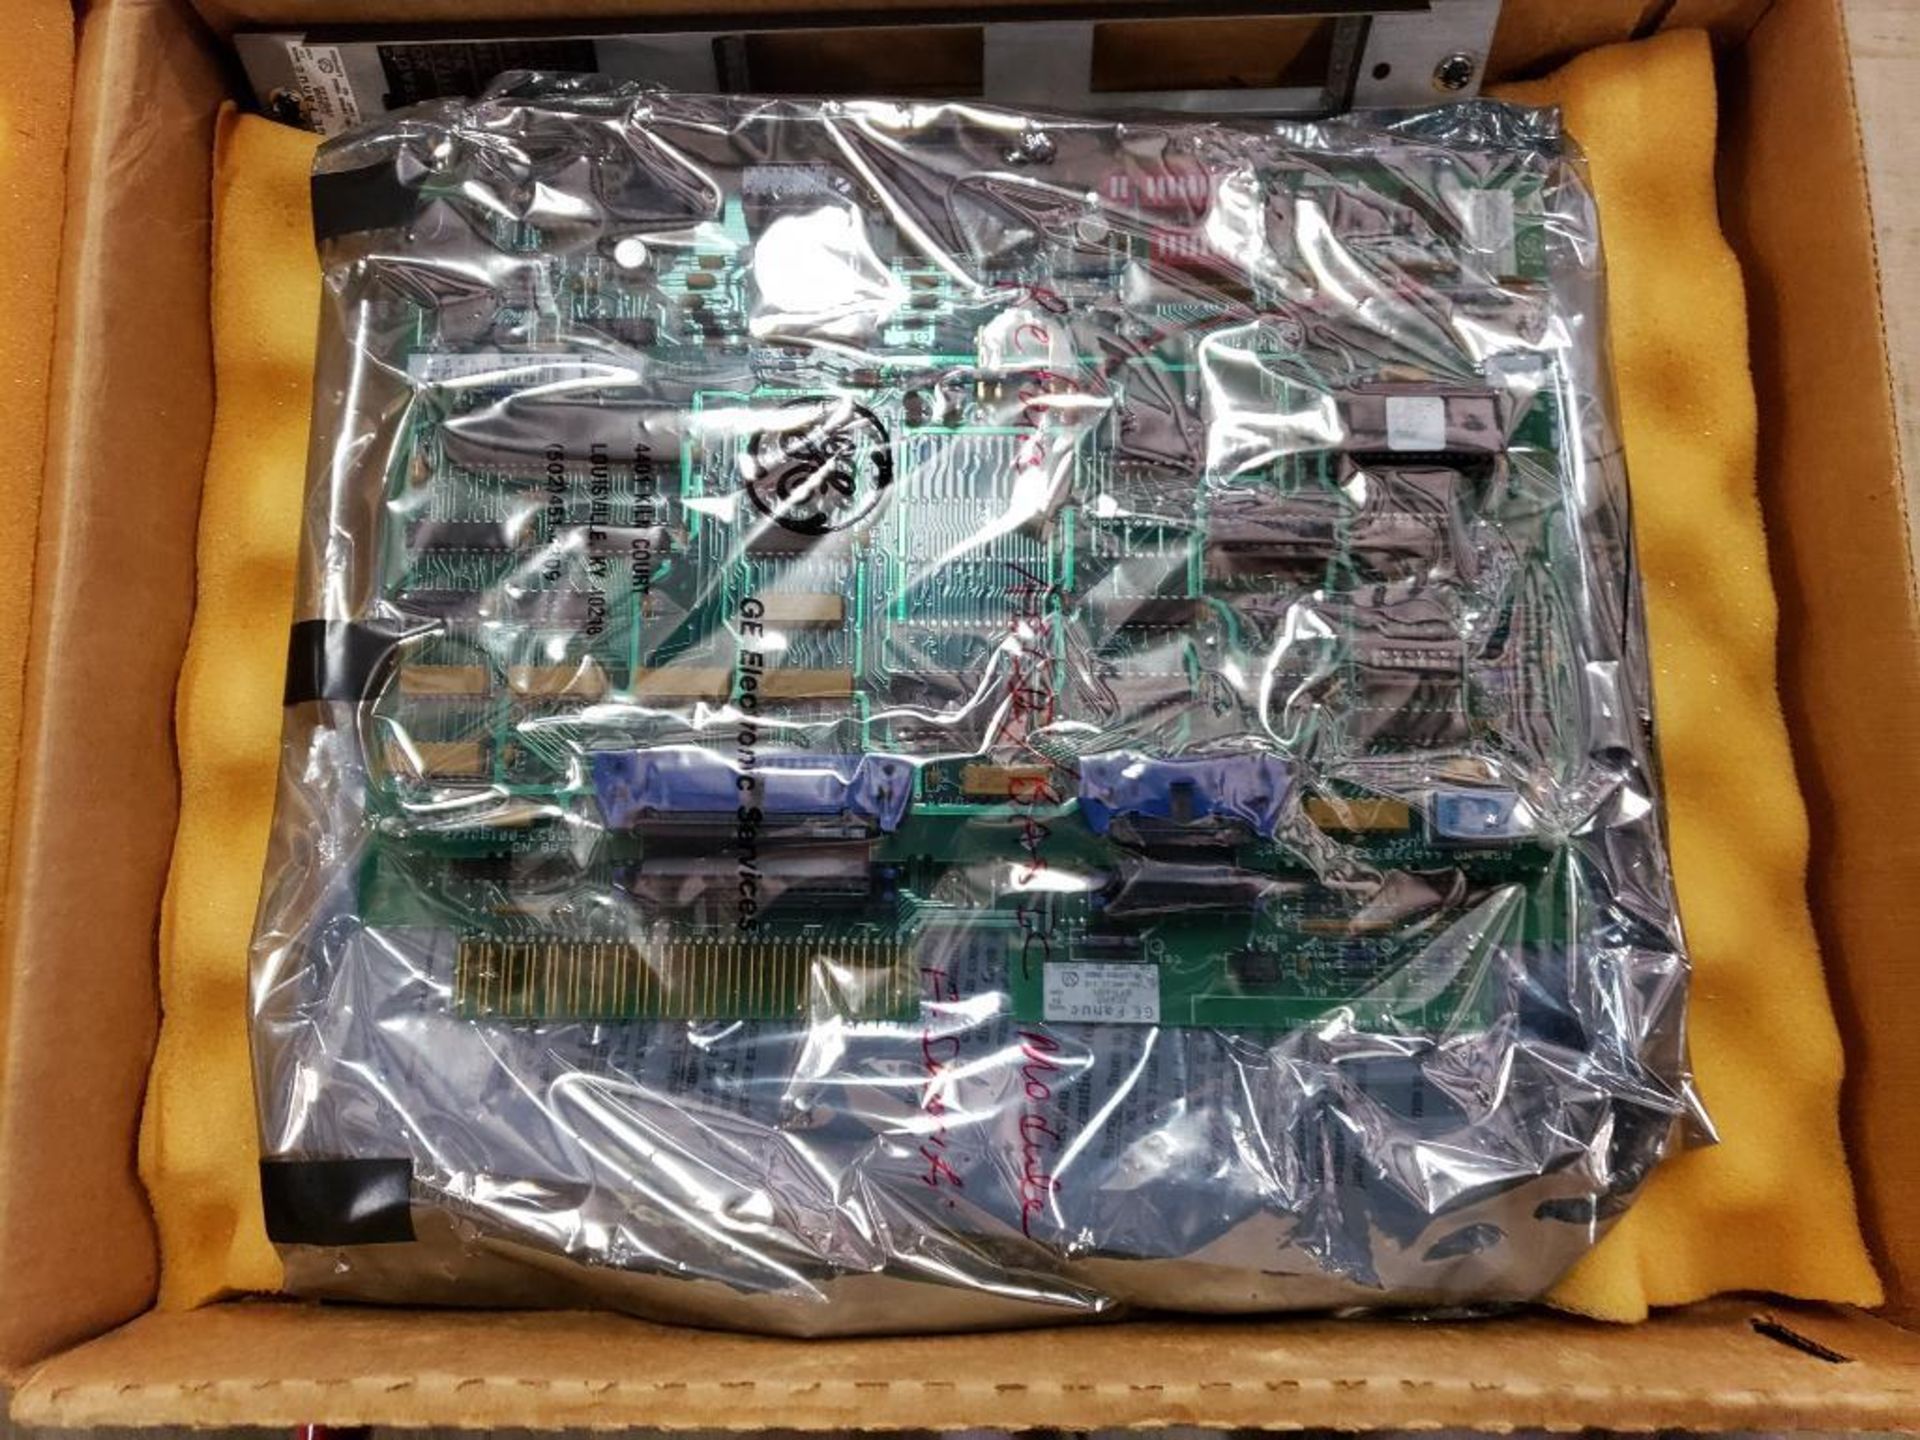 Qty 3 - Assorted GE Fanuc boards. Open boxes, appear refurb. units. - Image 8 of 9